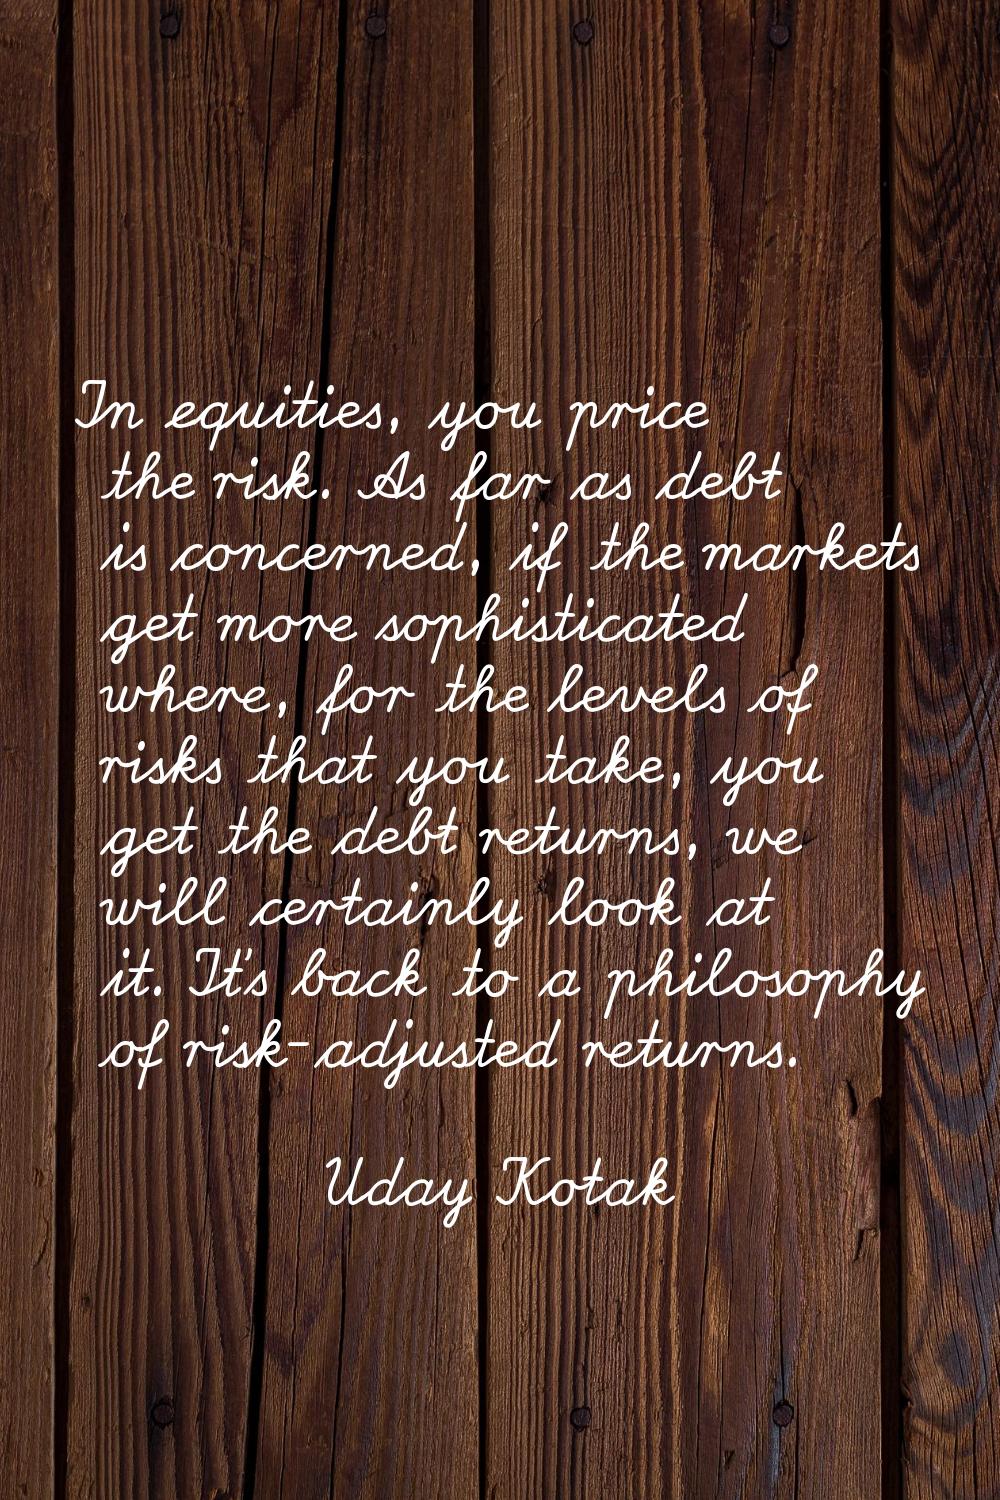 In equities, you price the risk. As far as debt is concerned, if the markets get more sophisticated